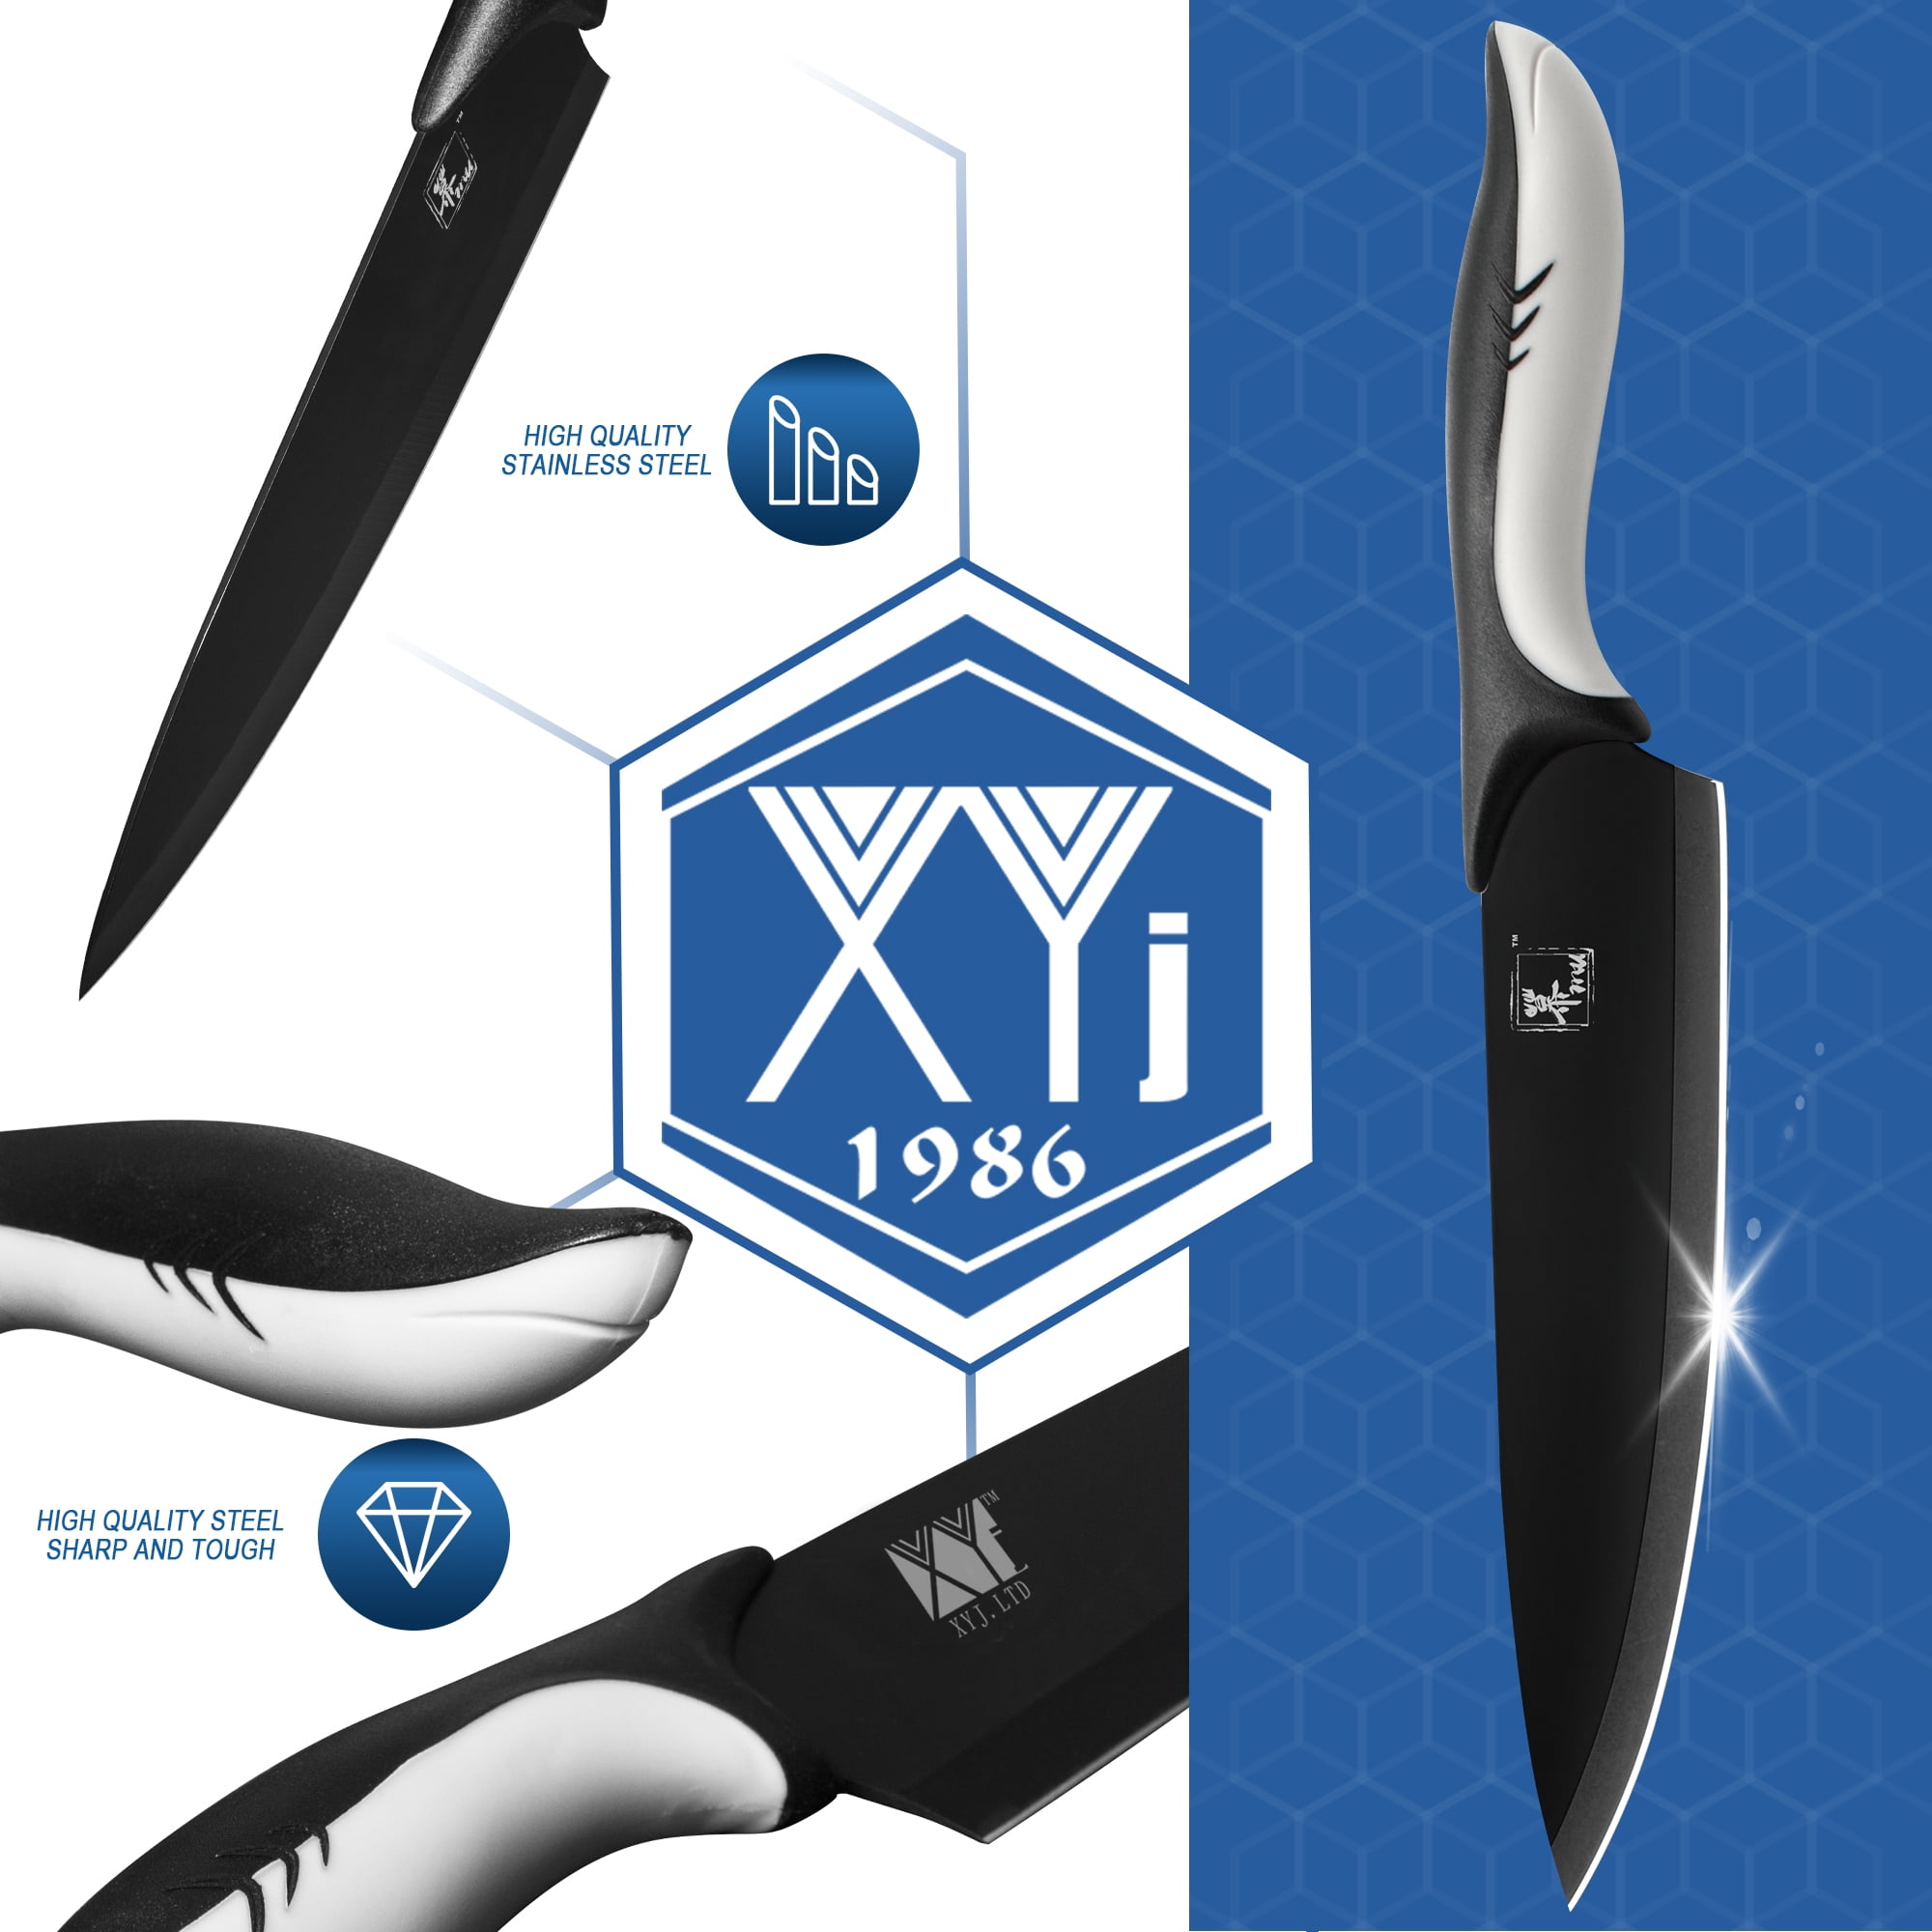 XYJ Portable Chef Knife Set Professional,Since 1986,14.5 Inch Slice Cooking  Knife,Camping Kitchen Knives With Cover,Mini Knife,Hoining Steel,Long Blade  Butcher Knife,Full Tang,High Carbon Steel